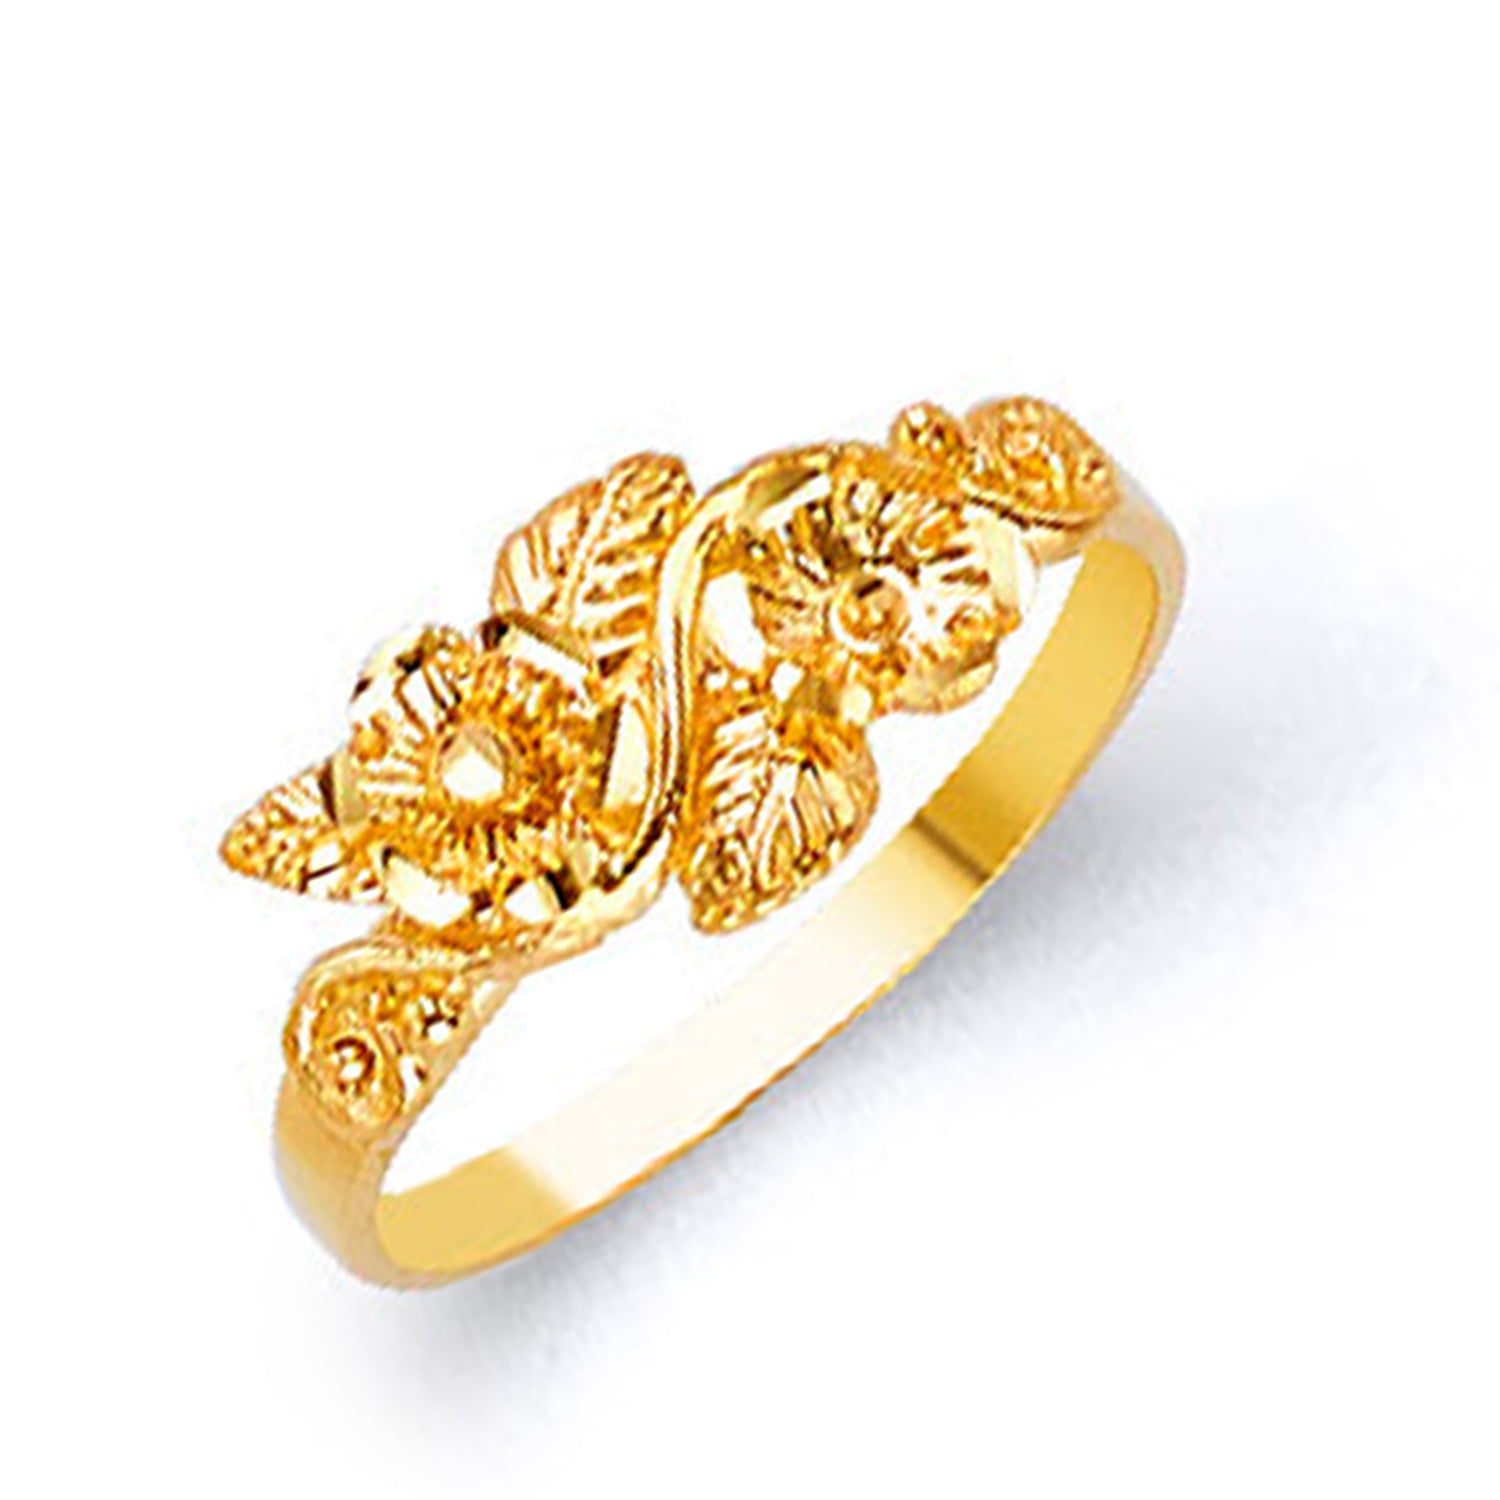 Gorgeous Twisted Ring in Solid Gold 